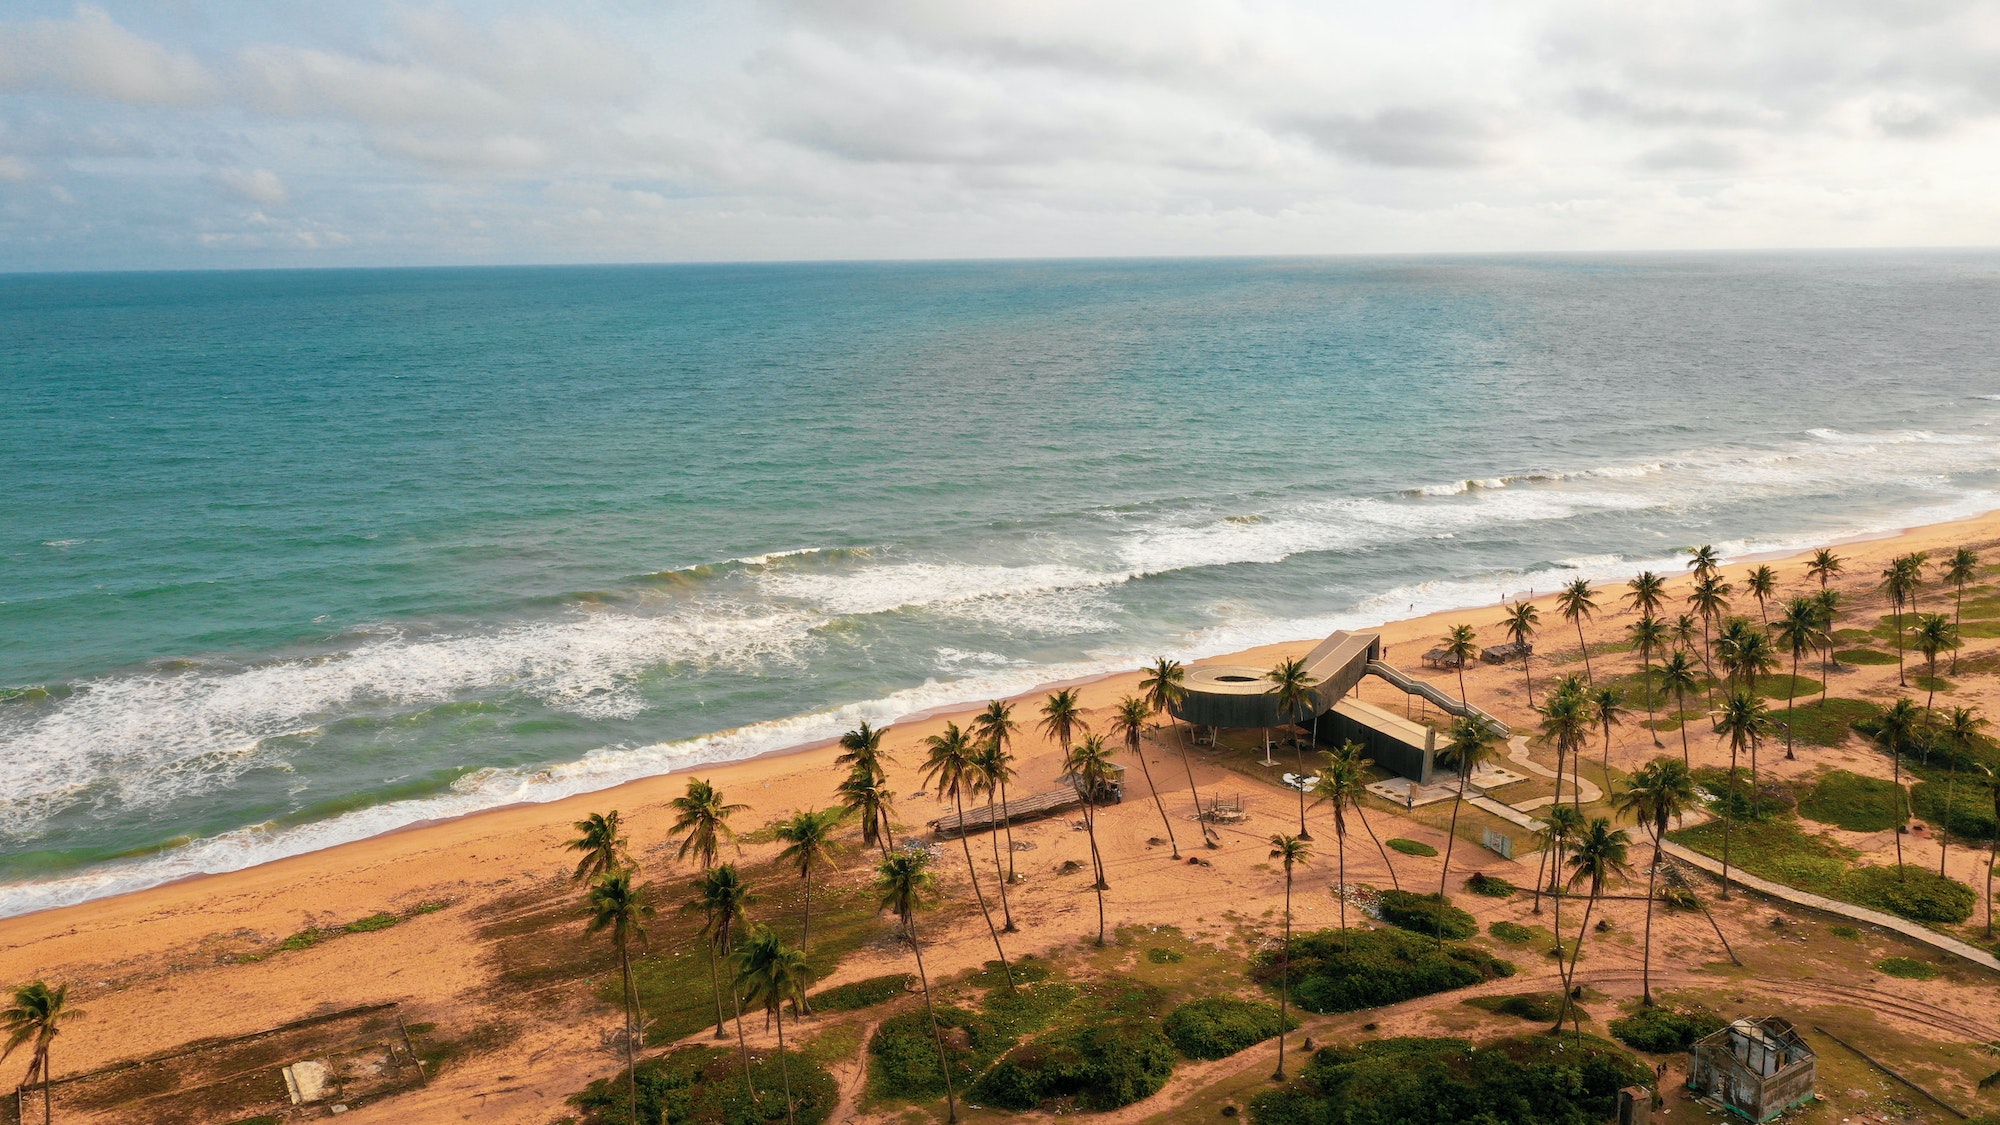 Aerial shot of the shore by the Atlantic Ocean captured in Badagry, Lagos State, Nigeria